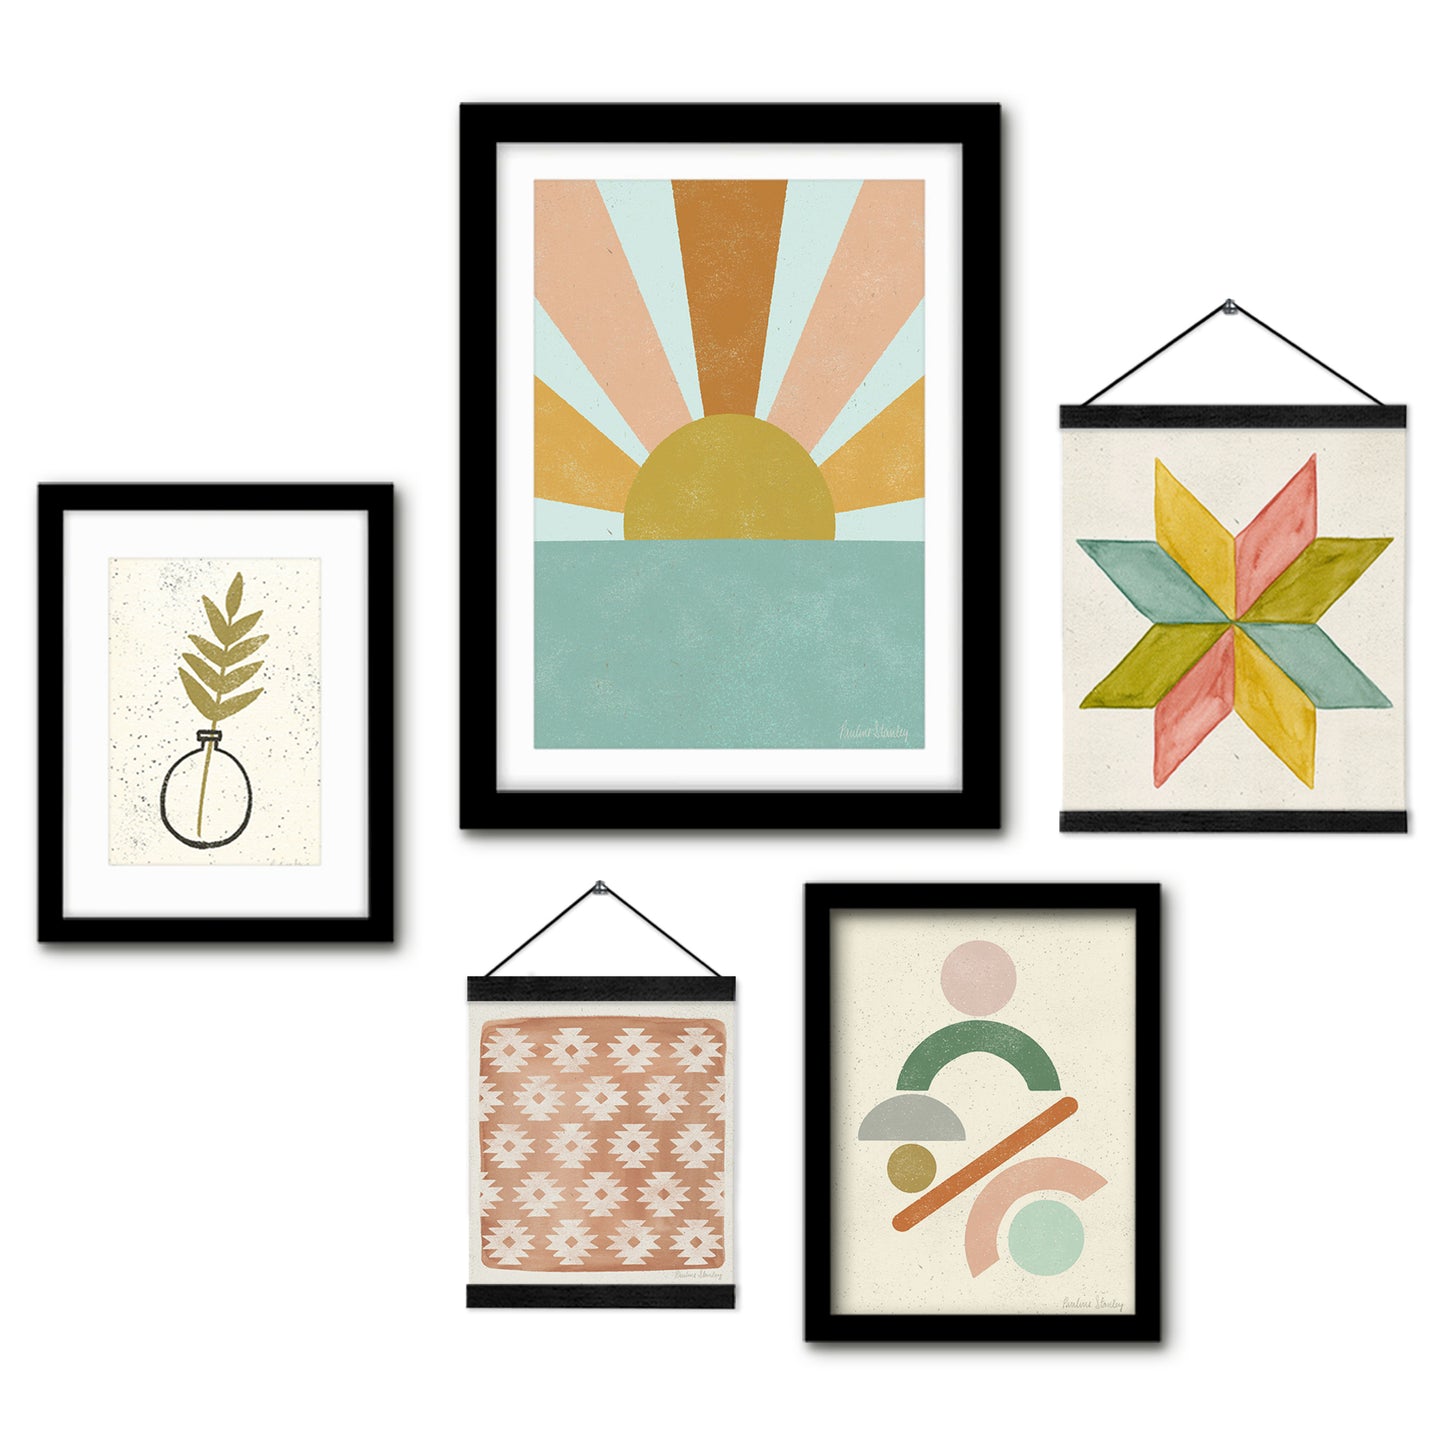 Pastel Colored Abstract Shapes - Framed Multimedia Gallery Art Set